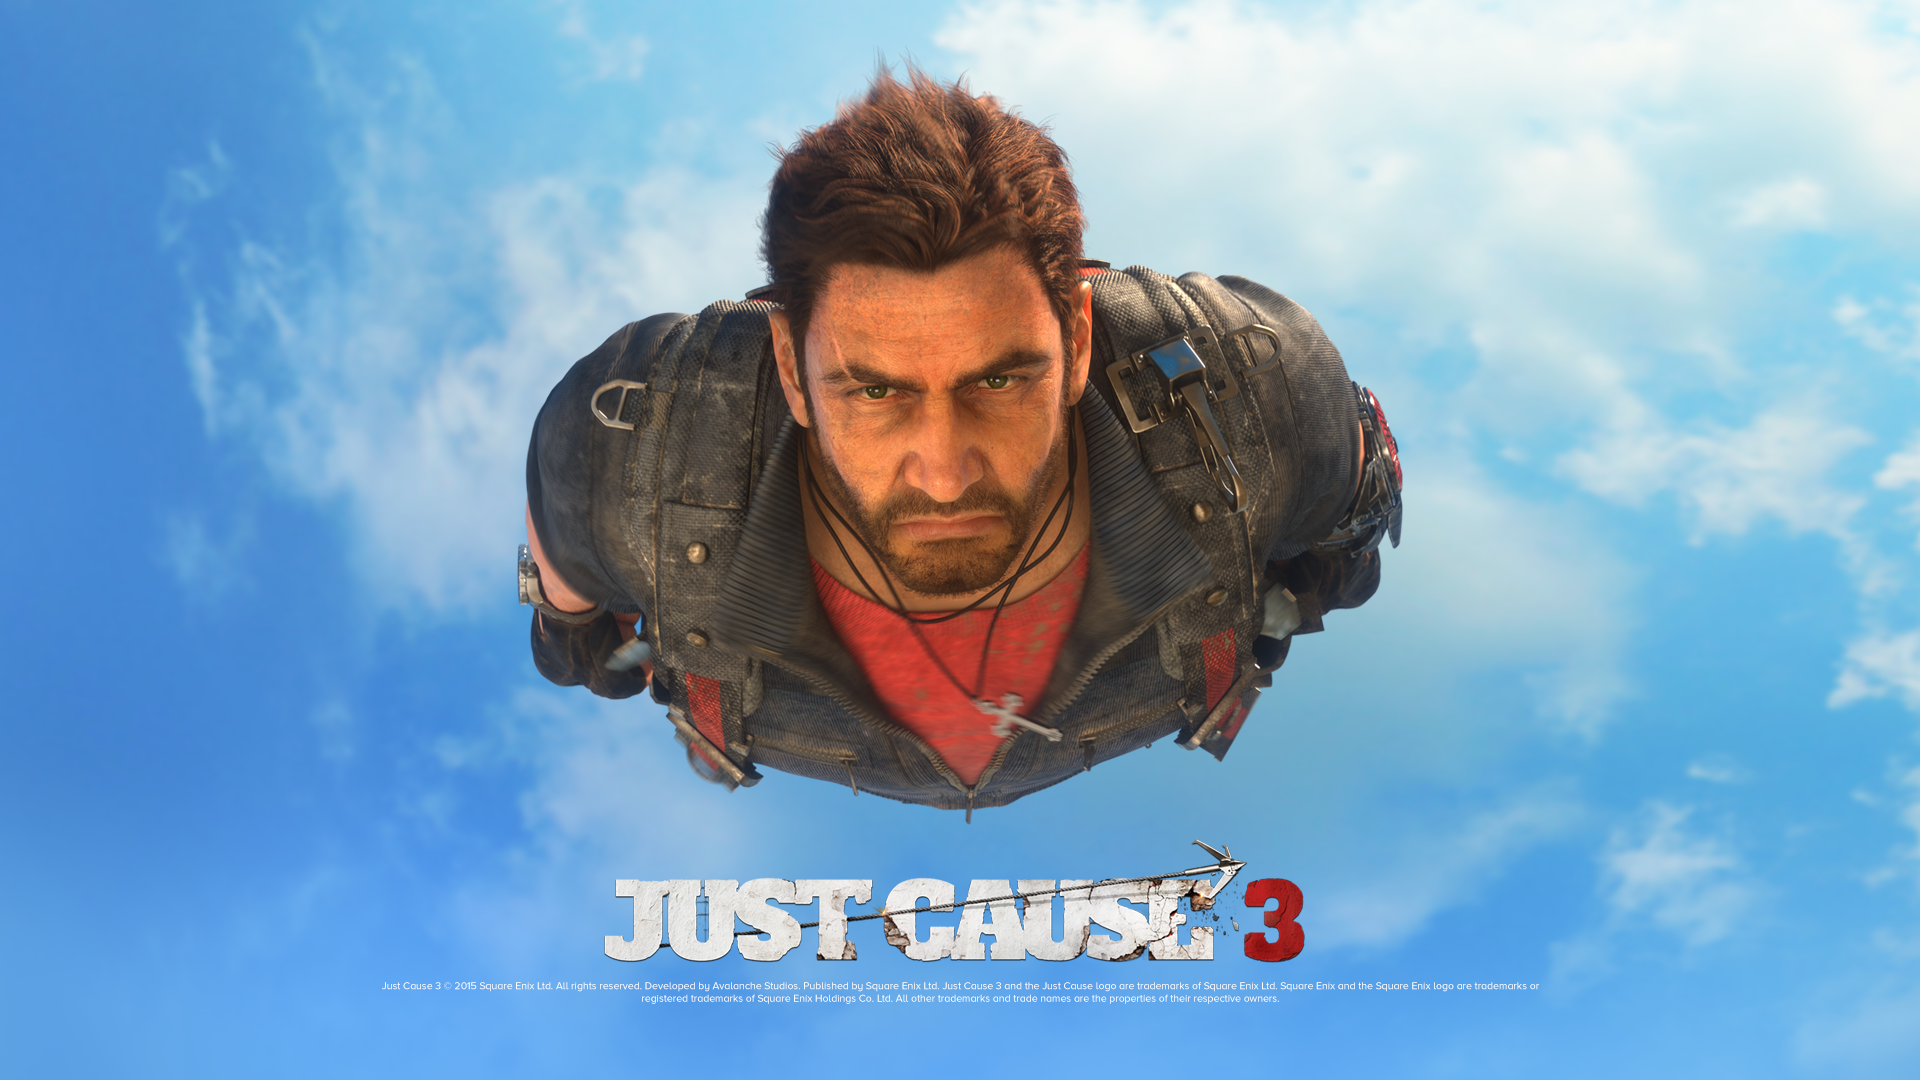 Just Cause 3 Rico Rodriguez Just Cause 1920x1080